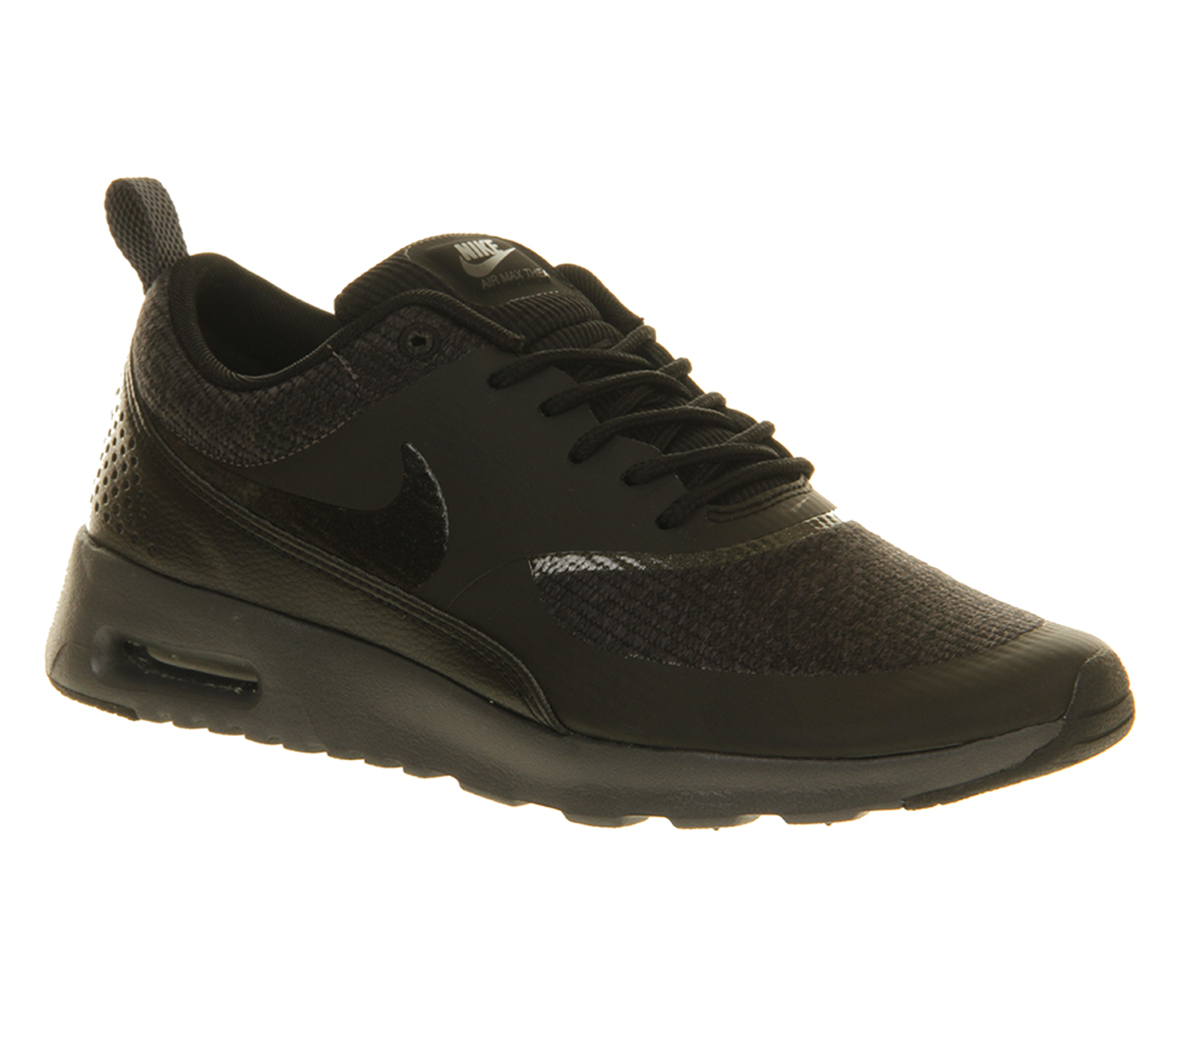 Nike Thea Black on Sale, SAVE 38% - thlaw.co.nz